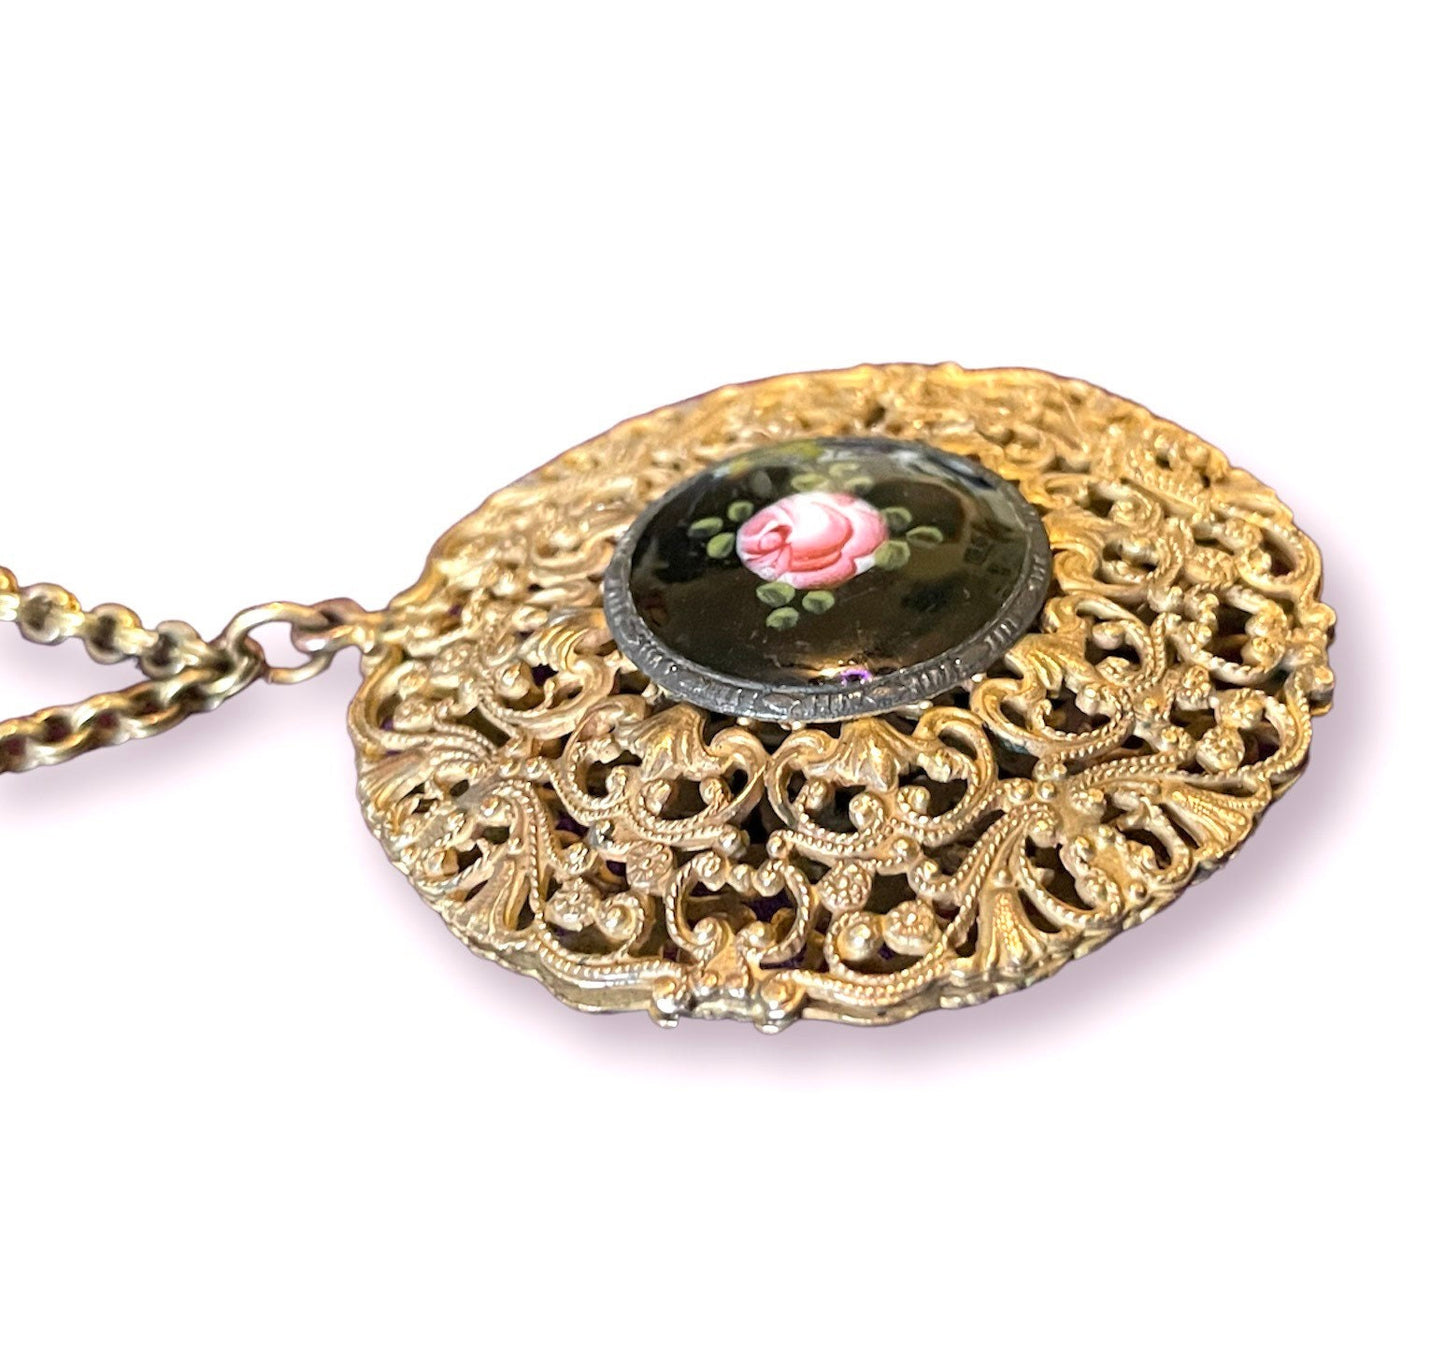 Vintage Black & Pink Cloisonné Rose Cameo in Heavy Brass Filigree Openwork Necklace